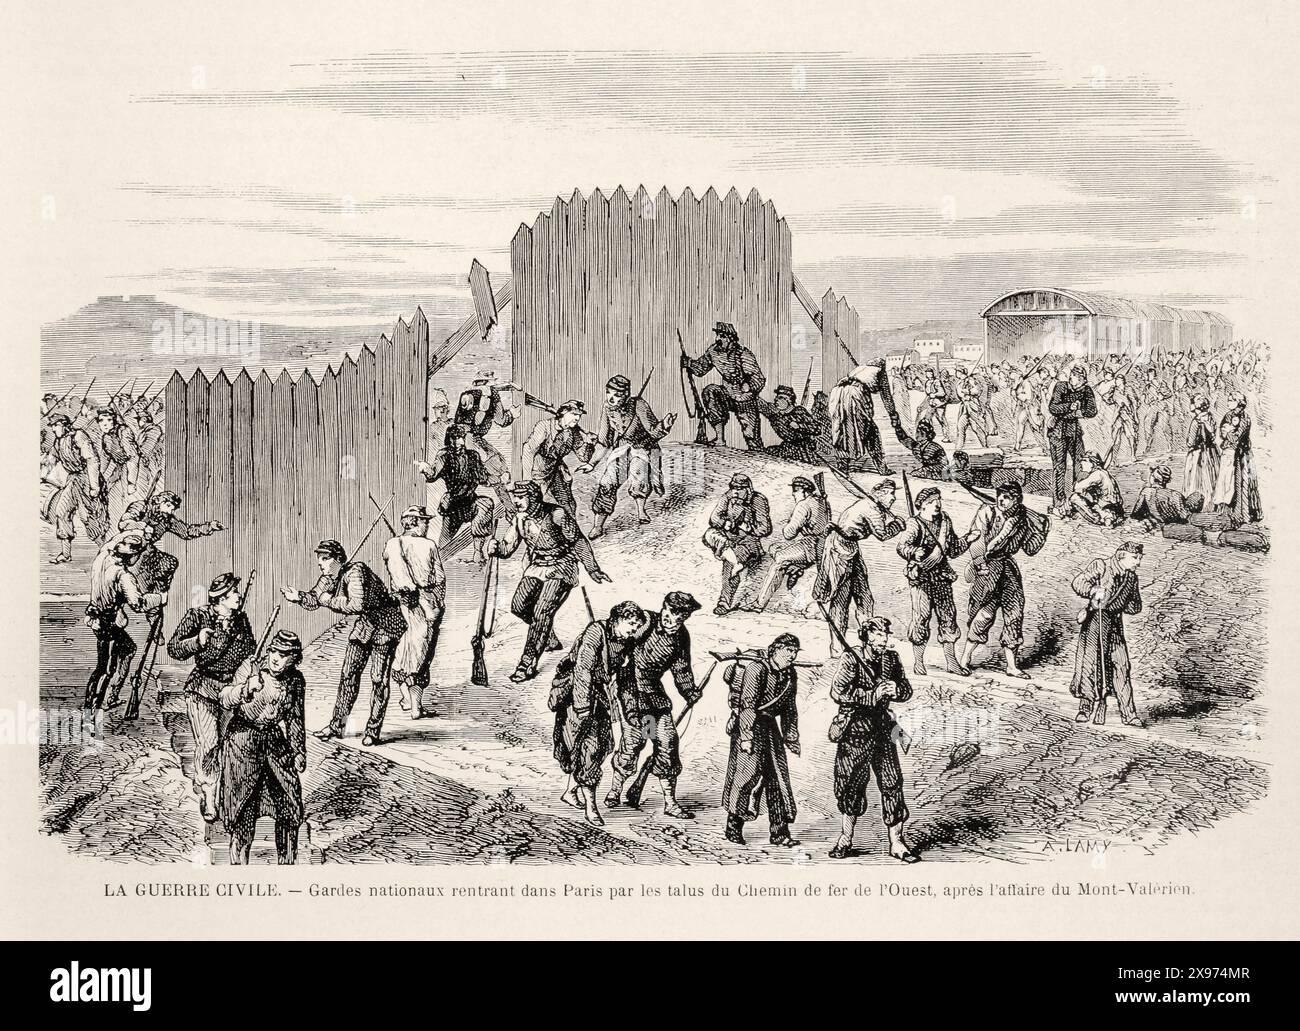 'LA GUERRE CIVILE. – Gardes nationaux rentrant dans Paris par les talus du Chemin de fer de l'Ouest, après l'affaire du Mont-Valérien.' ['CIVIL WAR. – National Guards returning to Paris by the slopes of the Western Railway, after the Mont-Valérien affair.'] - Extract from 'L'Illustration Journal Universel' - French illustrated magazine. The image shows armed men, some wounded, moving along a fortified area, with a sense of fatigue and weariness. The illustration style is hatched and detailed, typical of period engravings. Stock Photo